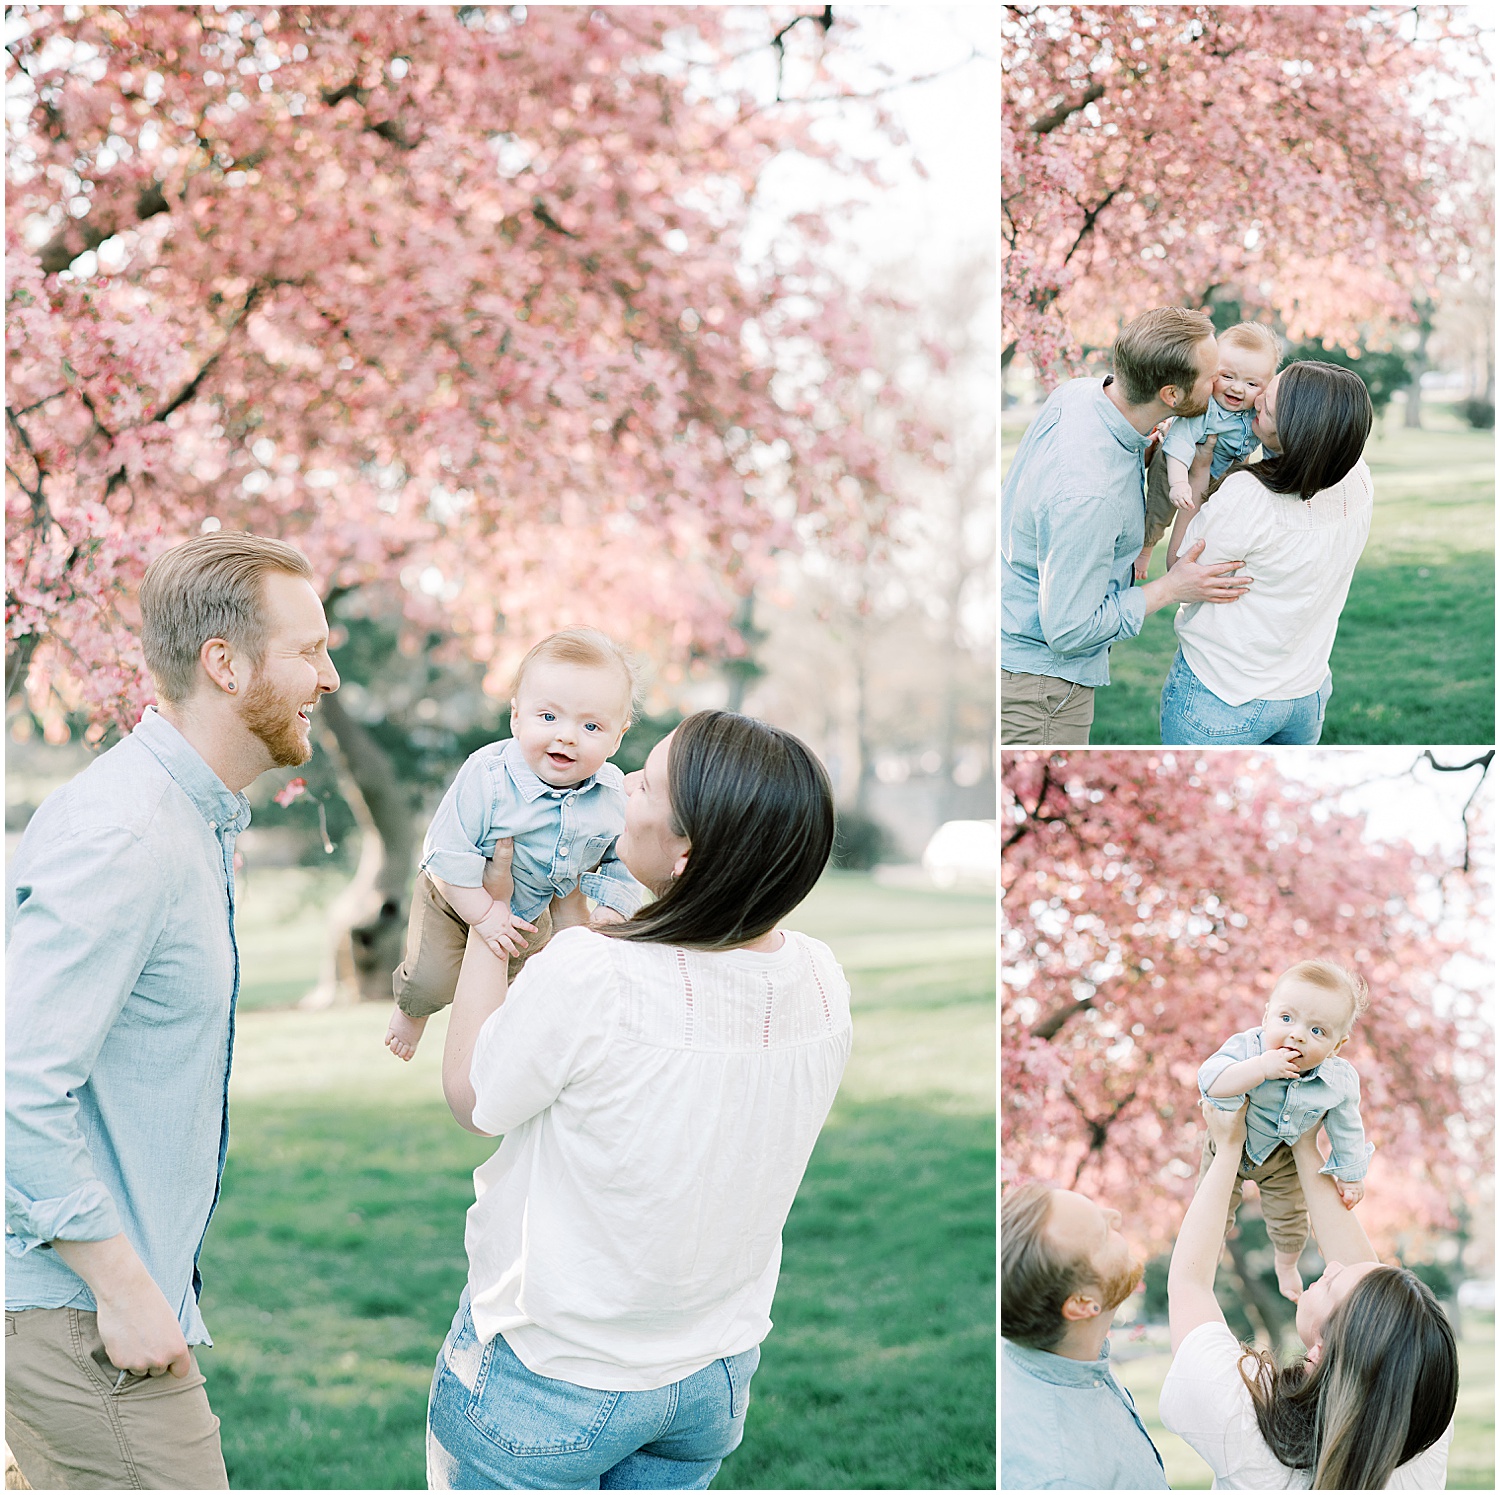 family under blossom tree in the spring for portraits of newborn baby boy